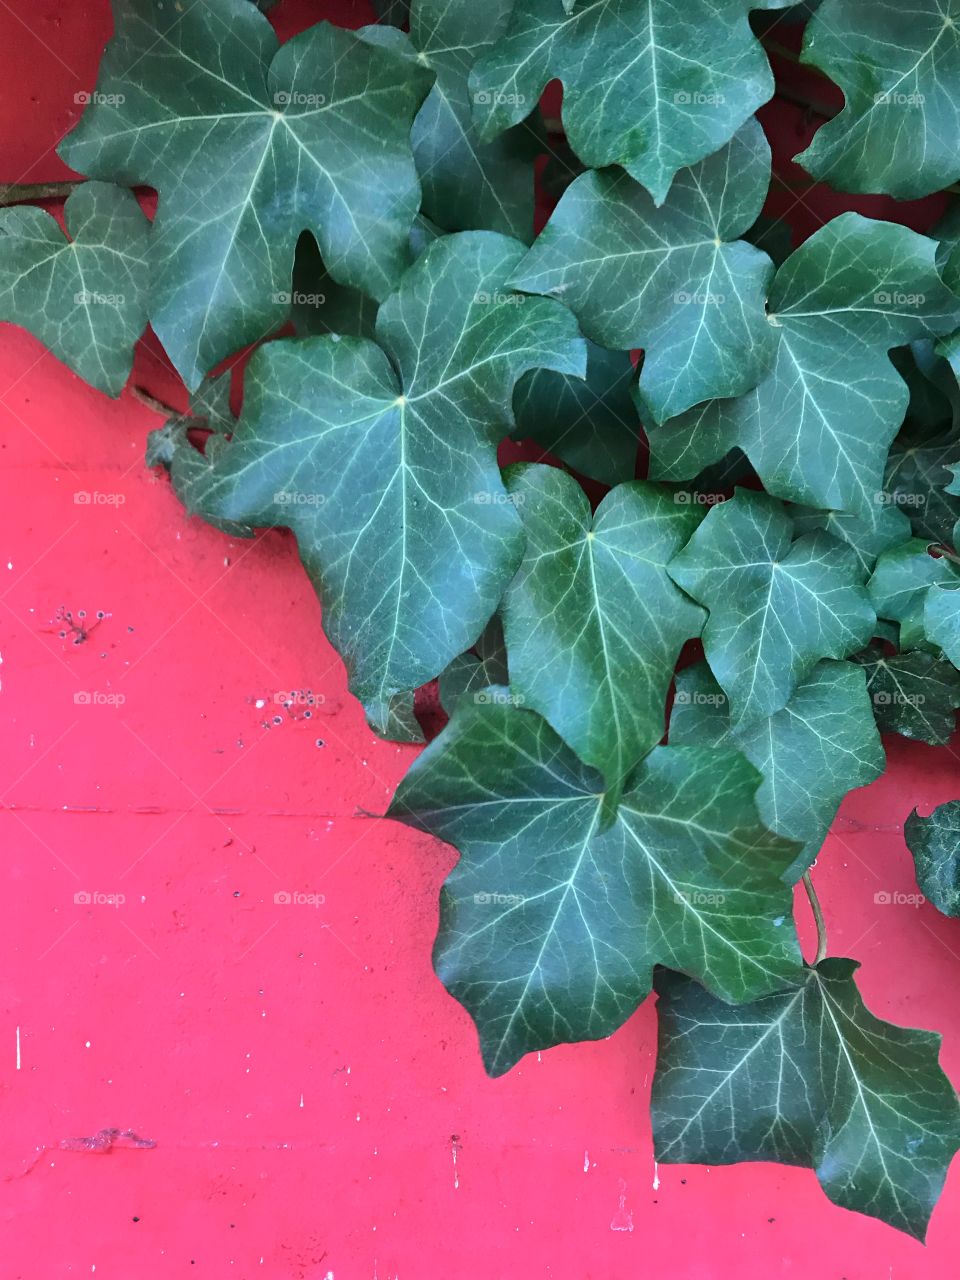 Green ivy leaves on red background 